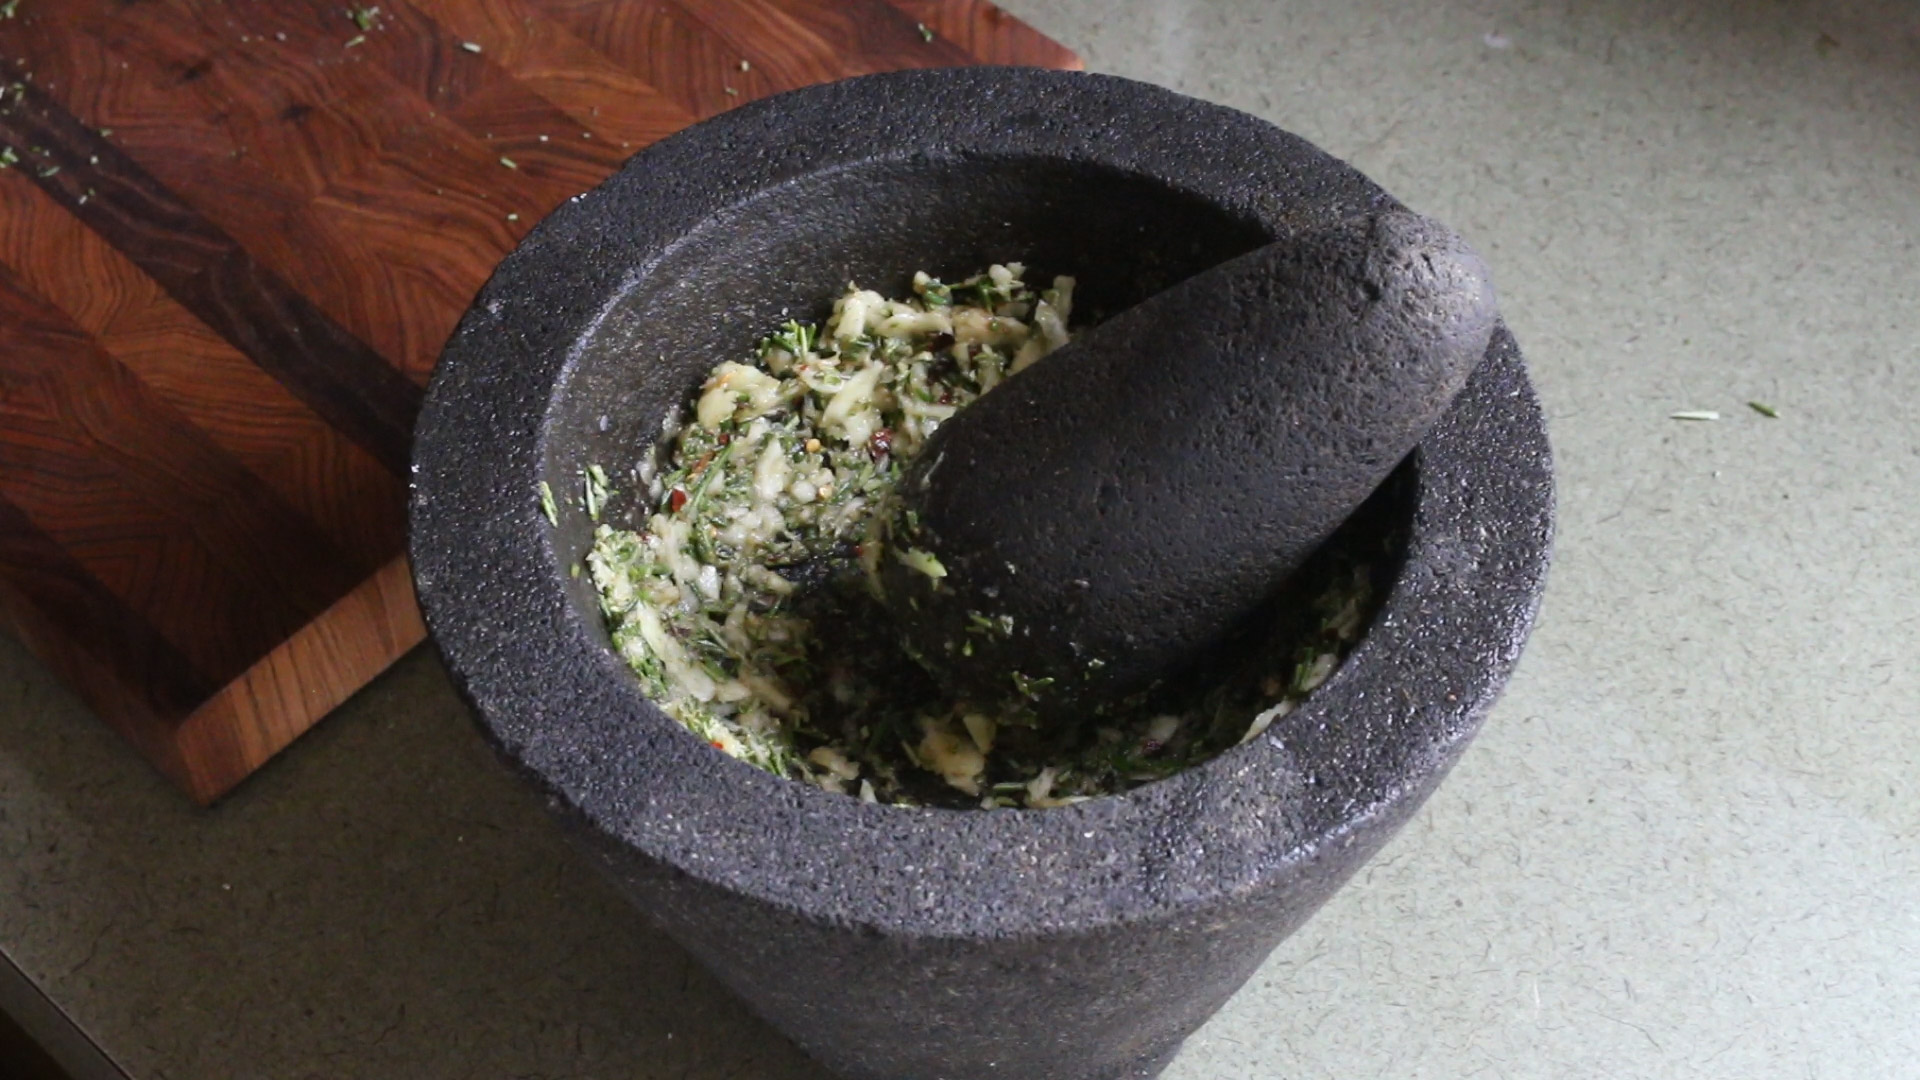 Grinding garlic, rosemary and chili with oil in a molcajete